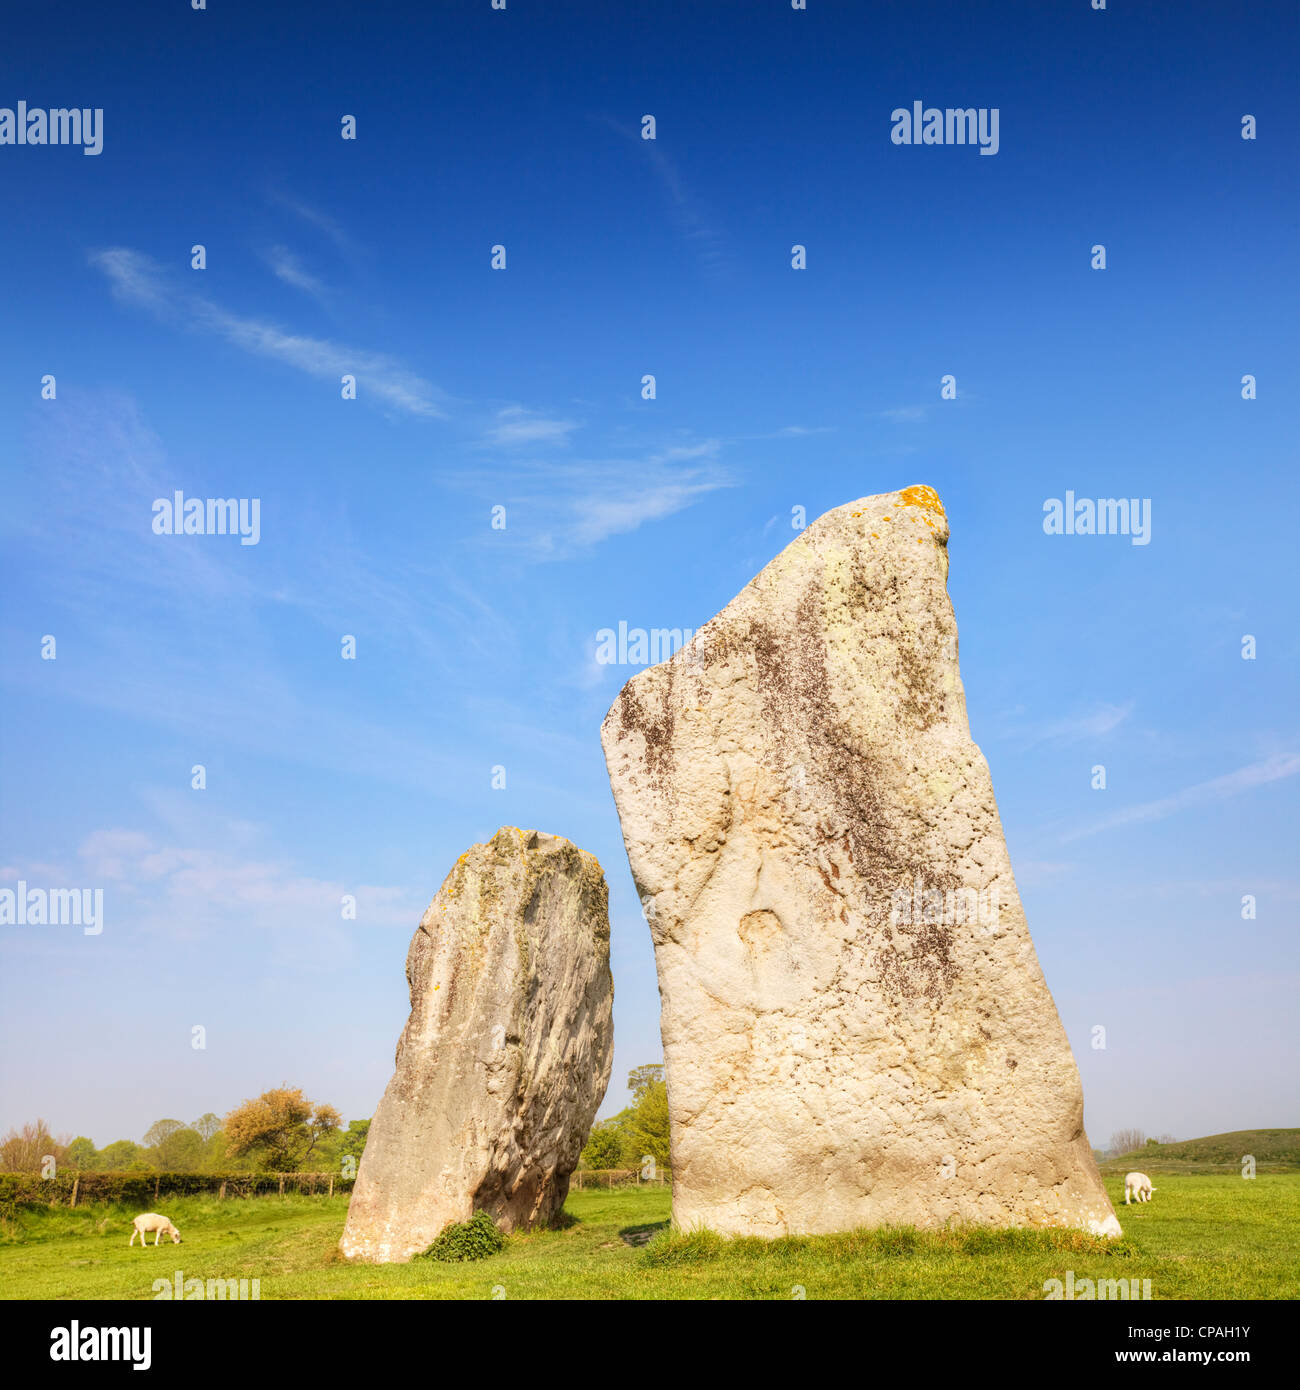 The two standing stones at Avebury, Wiltshire, England, known as The Cove. Stock Photo